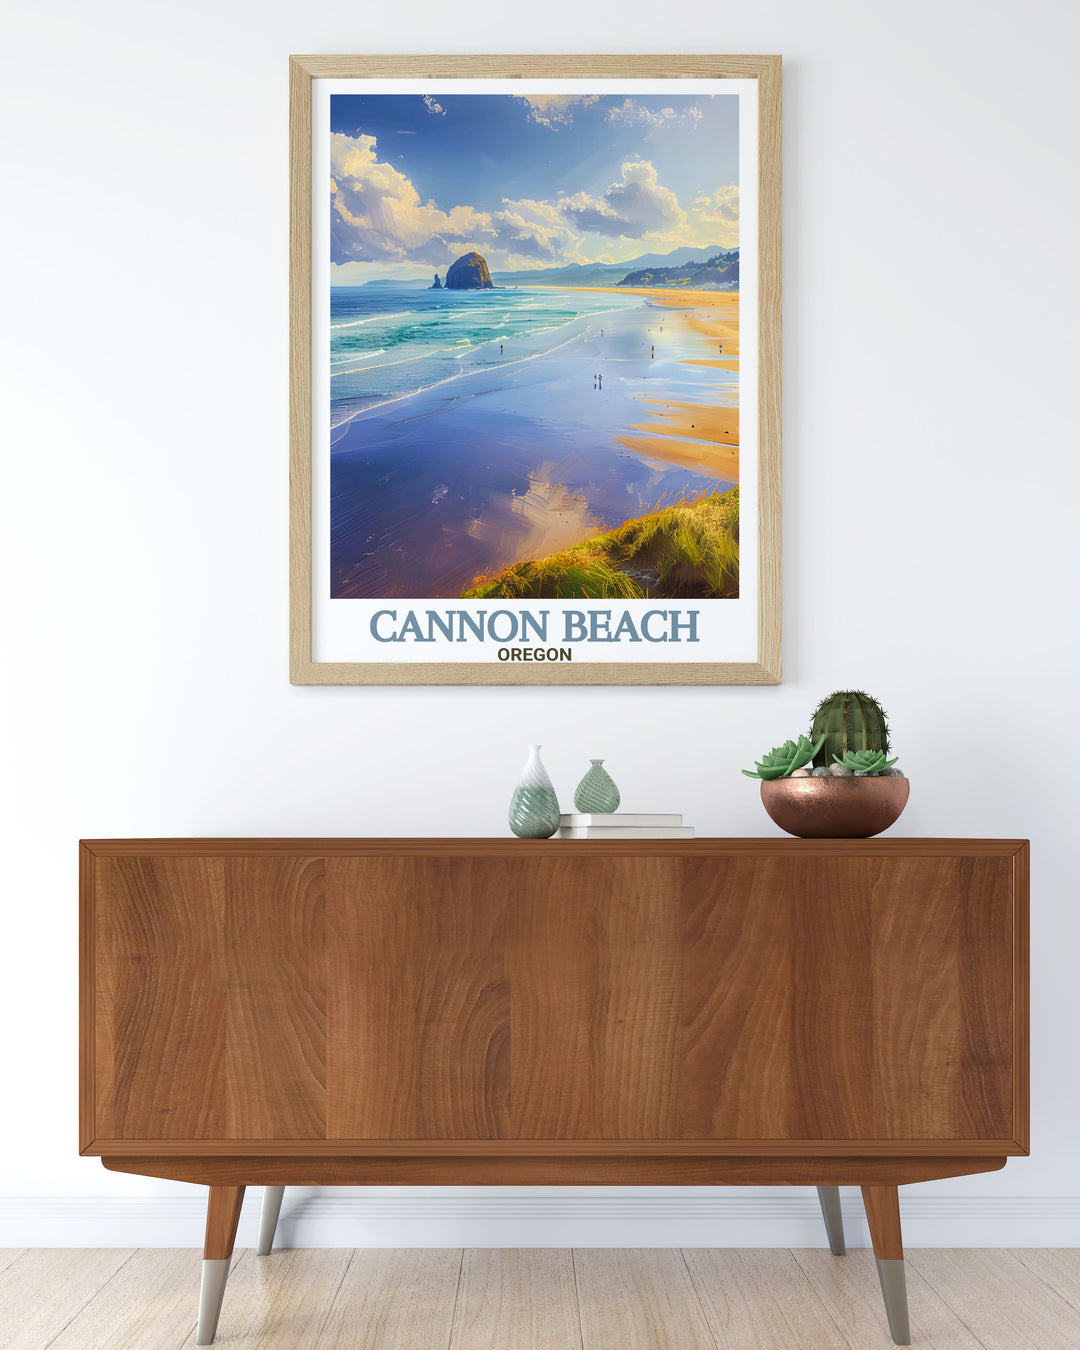 Cannon Beach vintage print featuring nostalgic scenes from the coastal town capturing the charm and history of the area perfect for those who love retro and vintage art